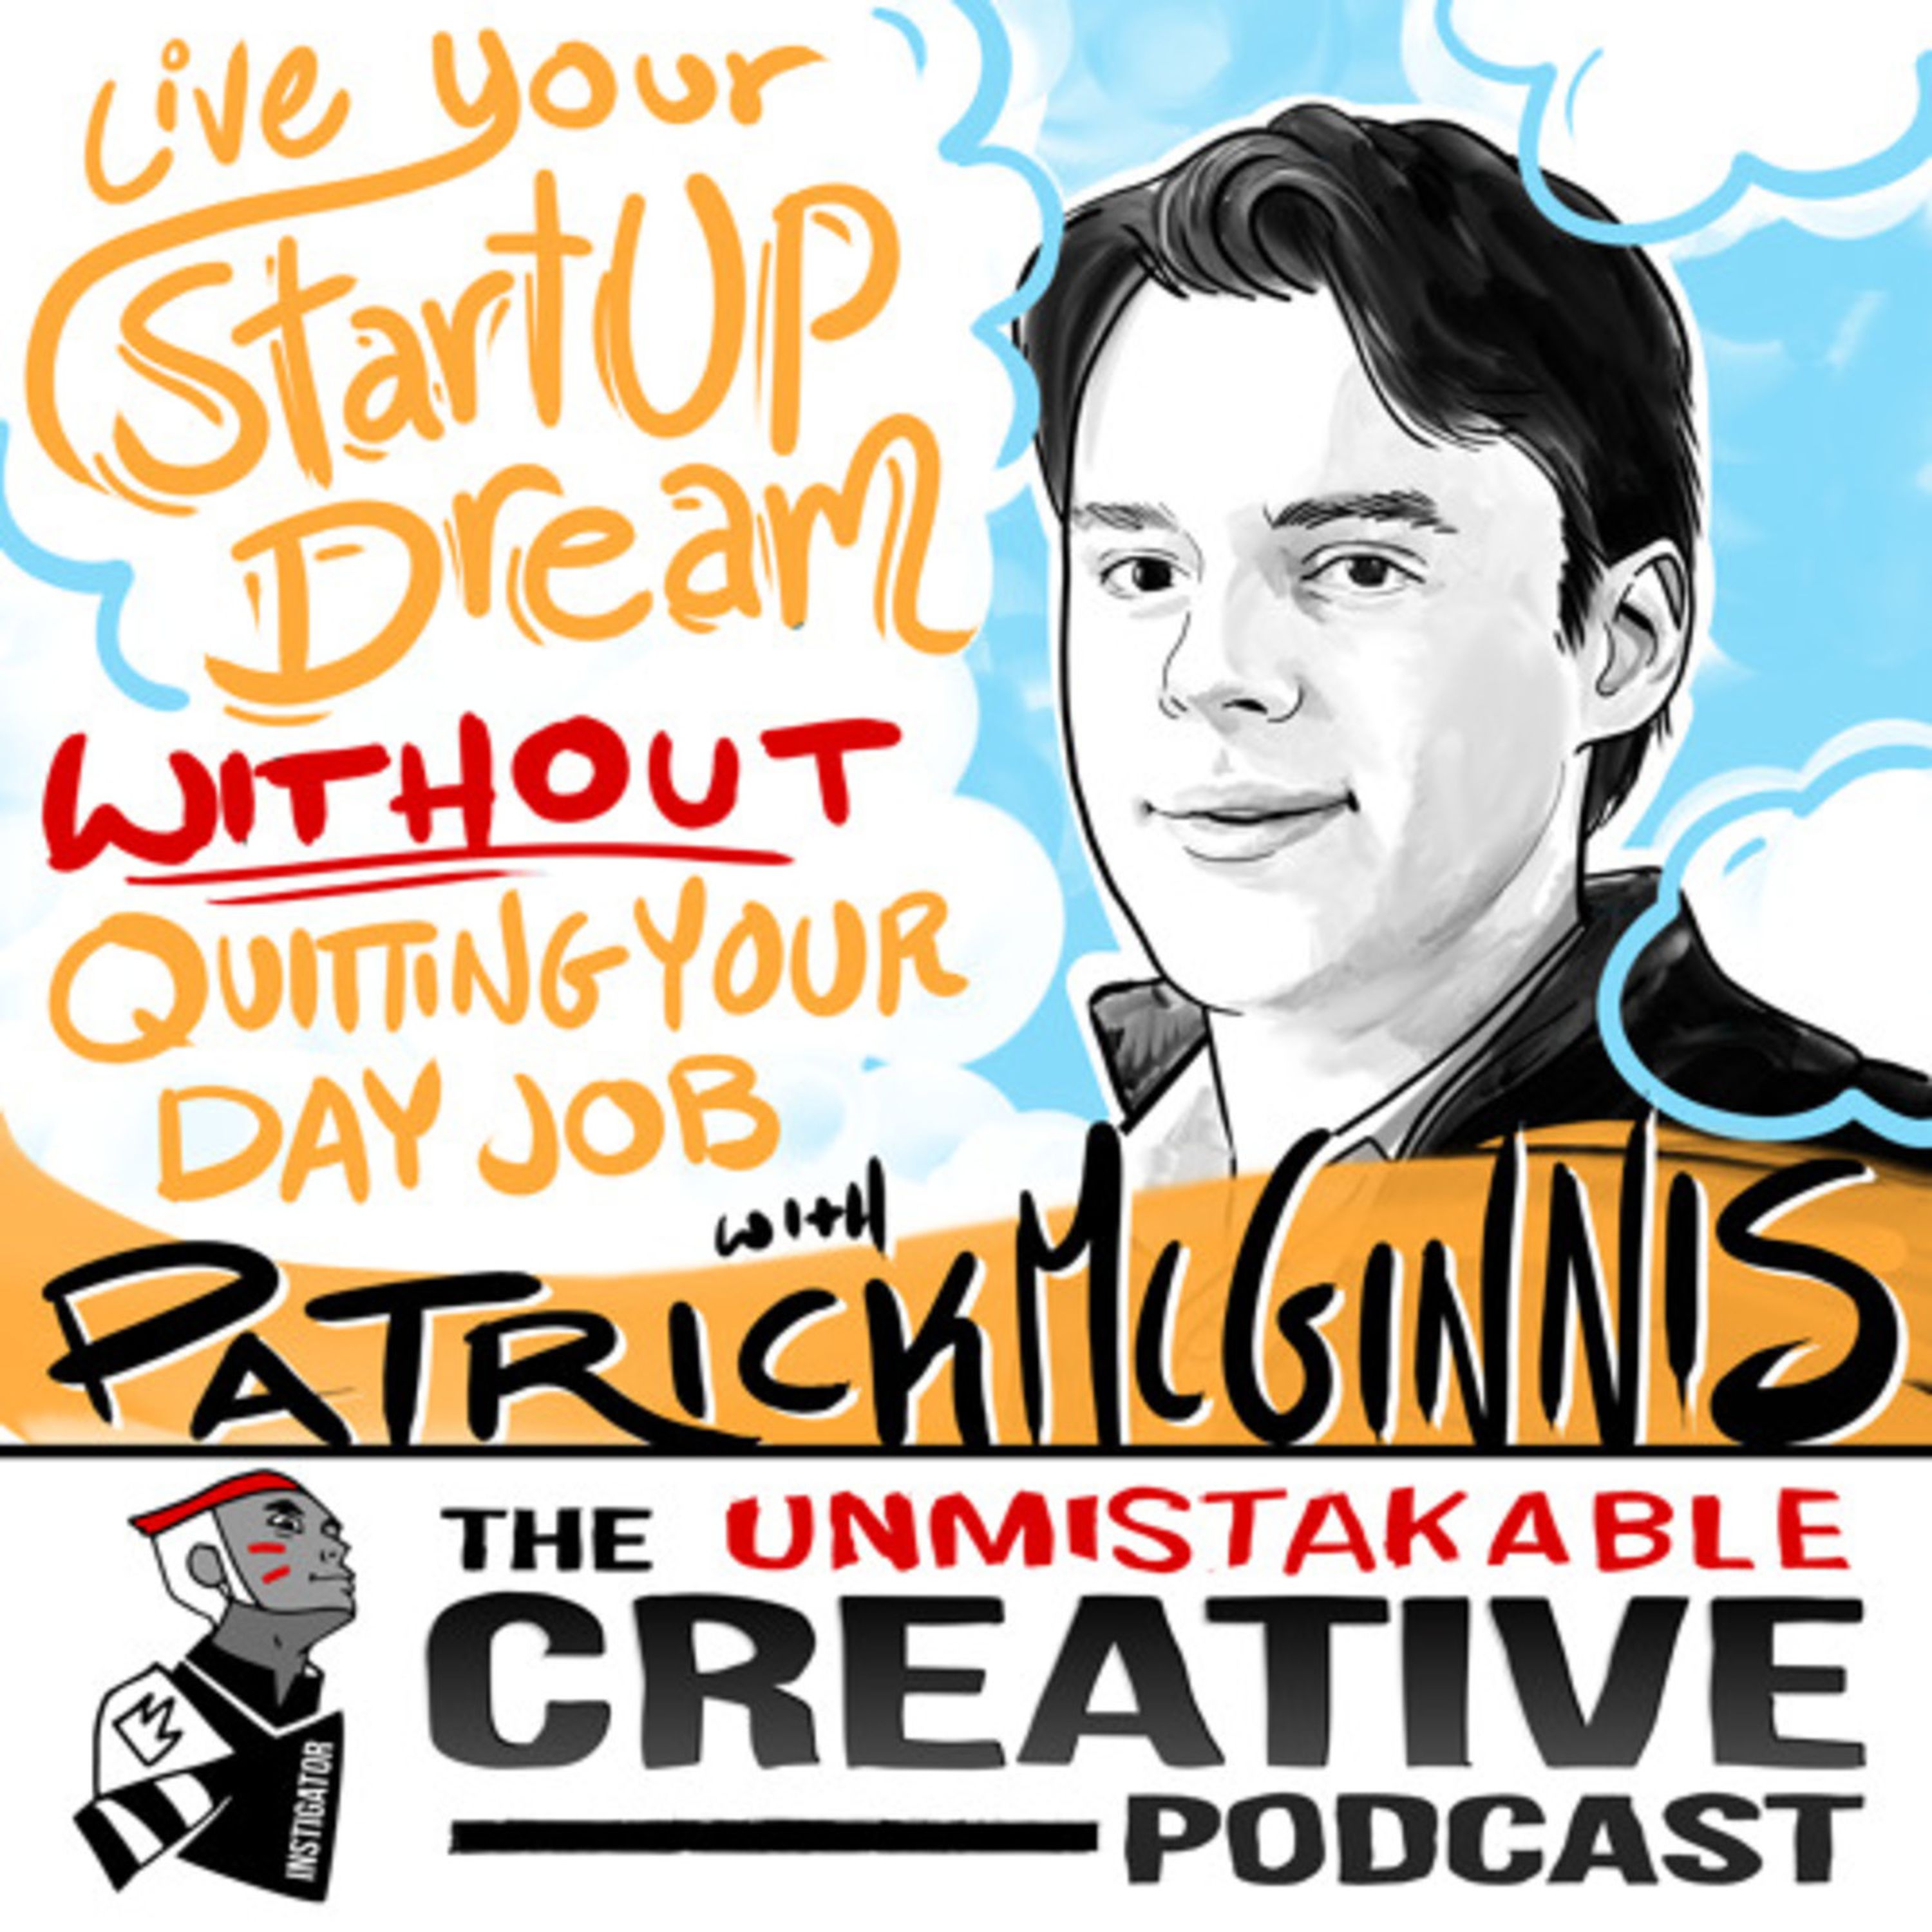 Best of: Live Your Startup Dream Without Quitting Your Day Job with Patrick Mcginnis